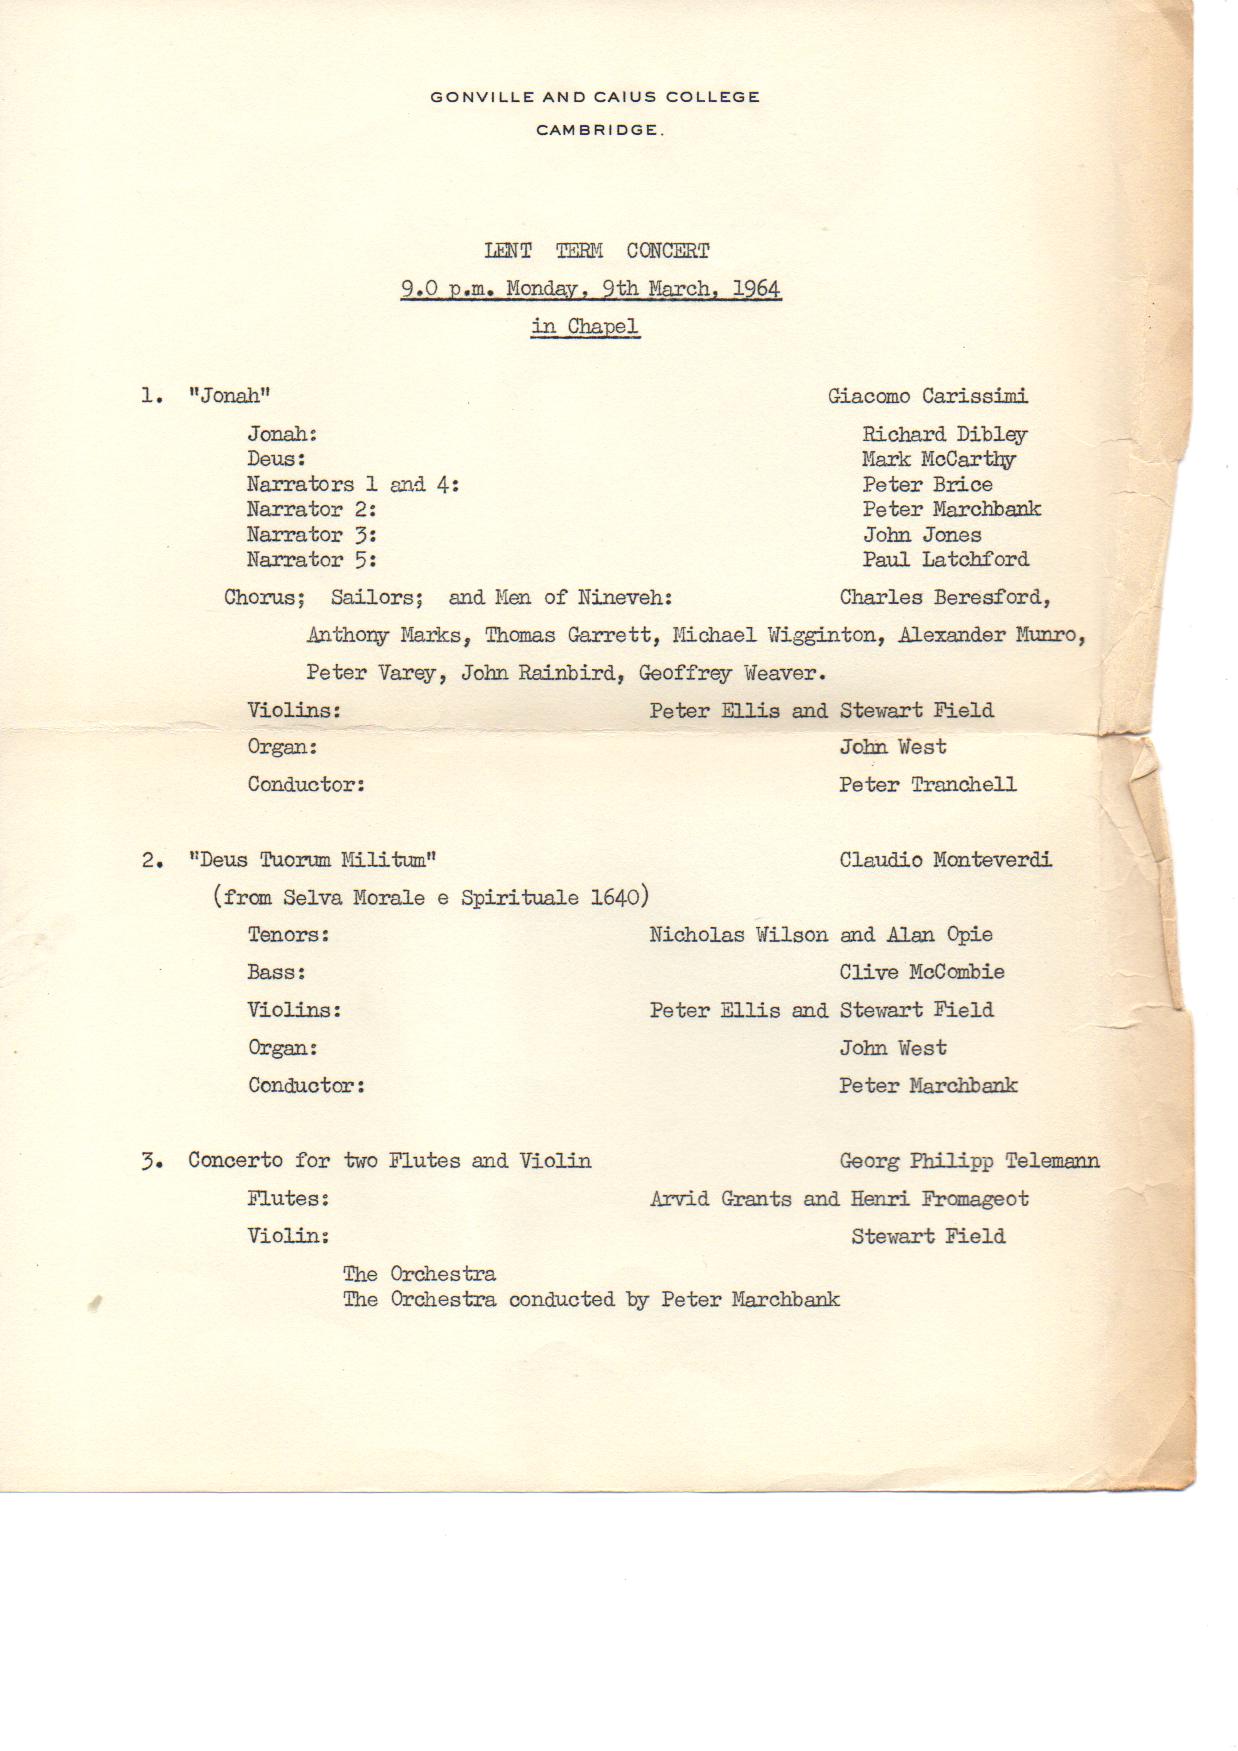 GONVILLE AND CAIUS COLLEGE 1964 LENT TERM CONCERT programme